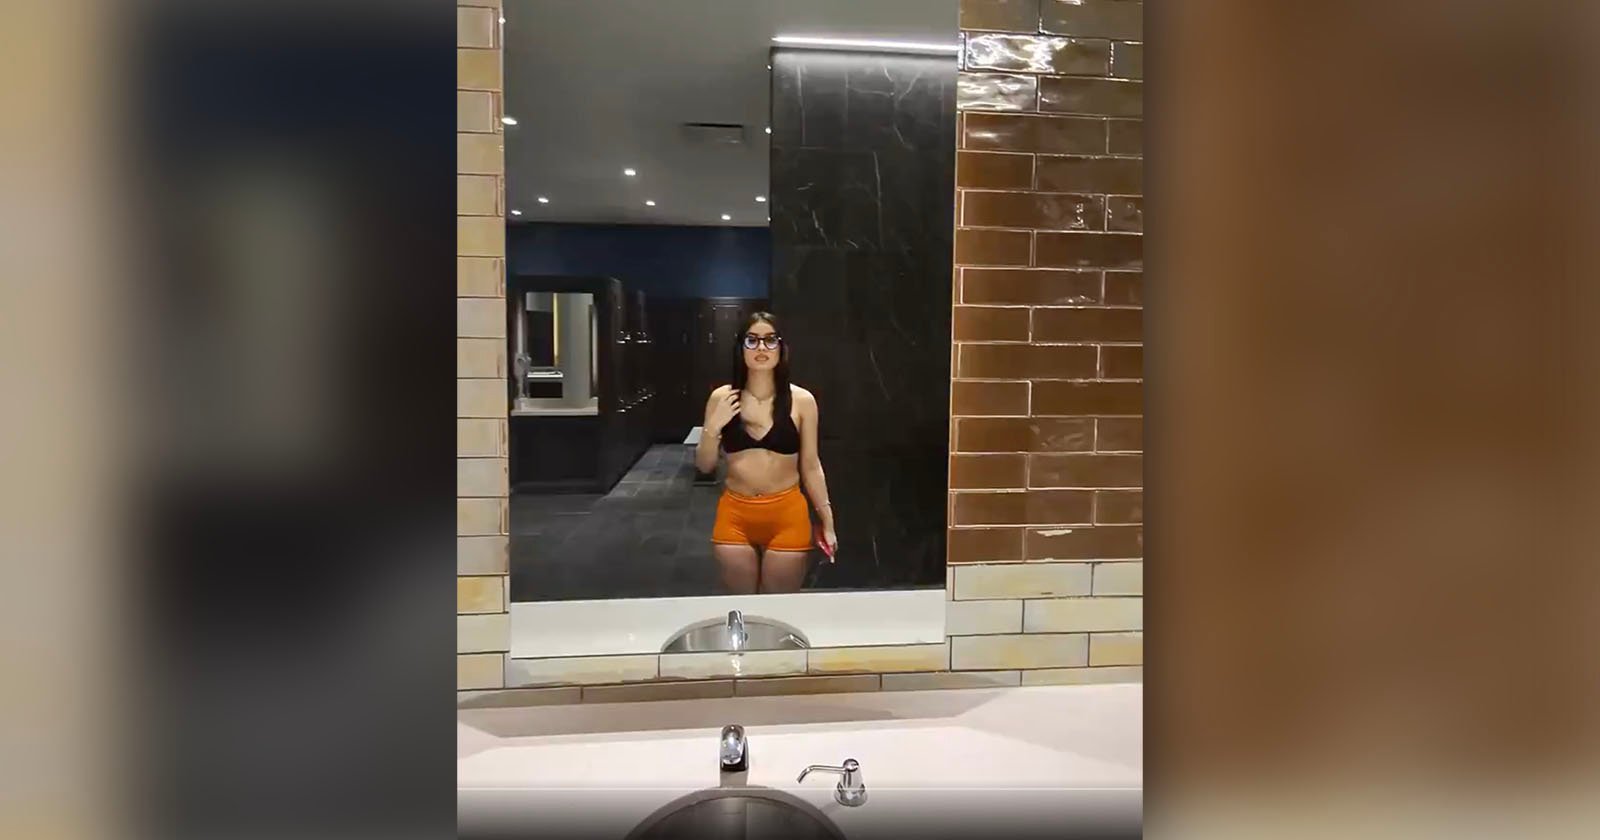  people can figure out how influencer filmed her 